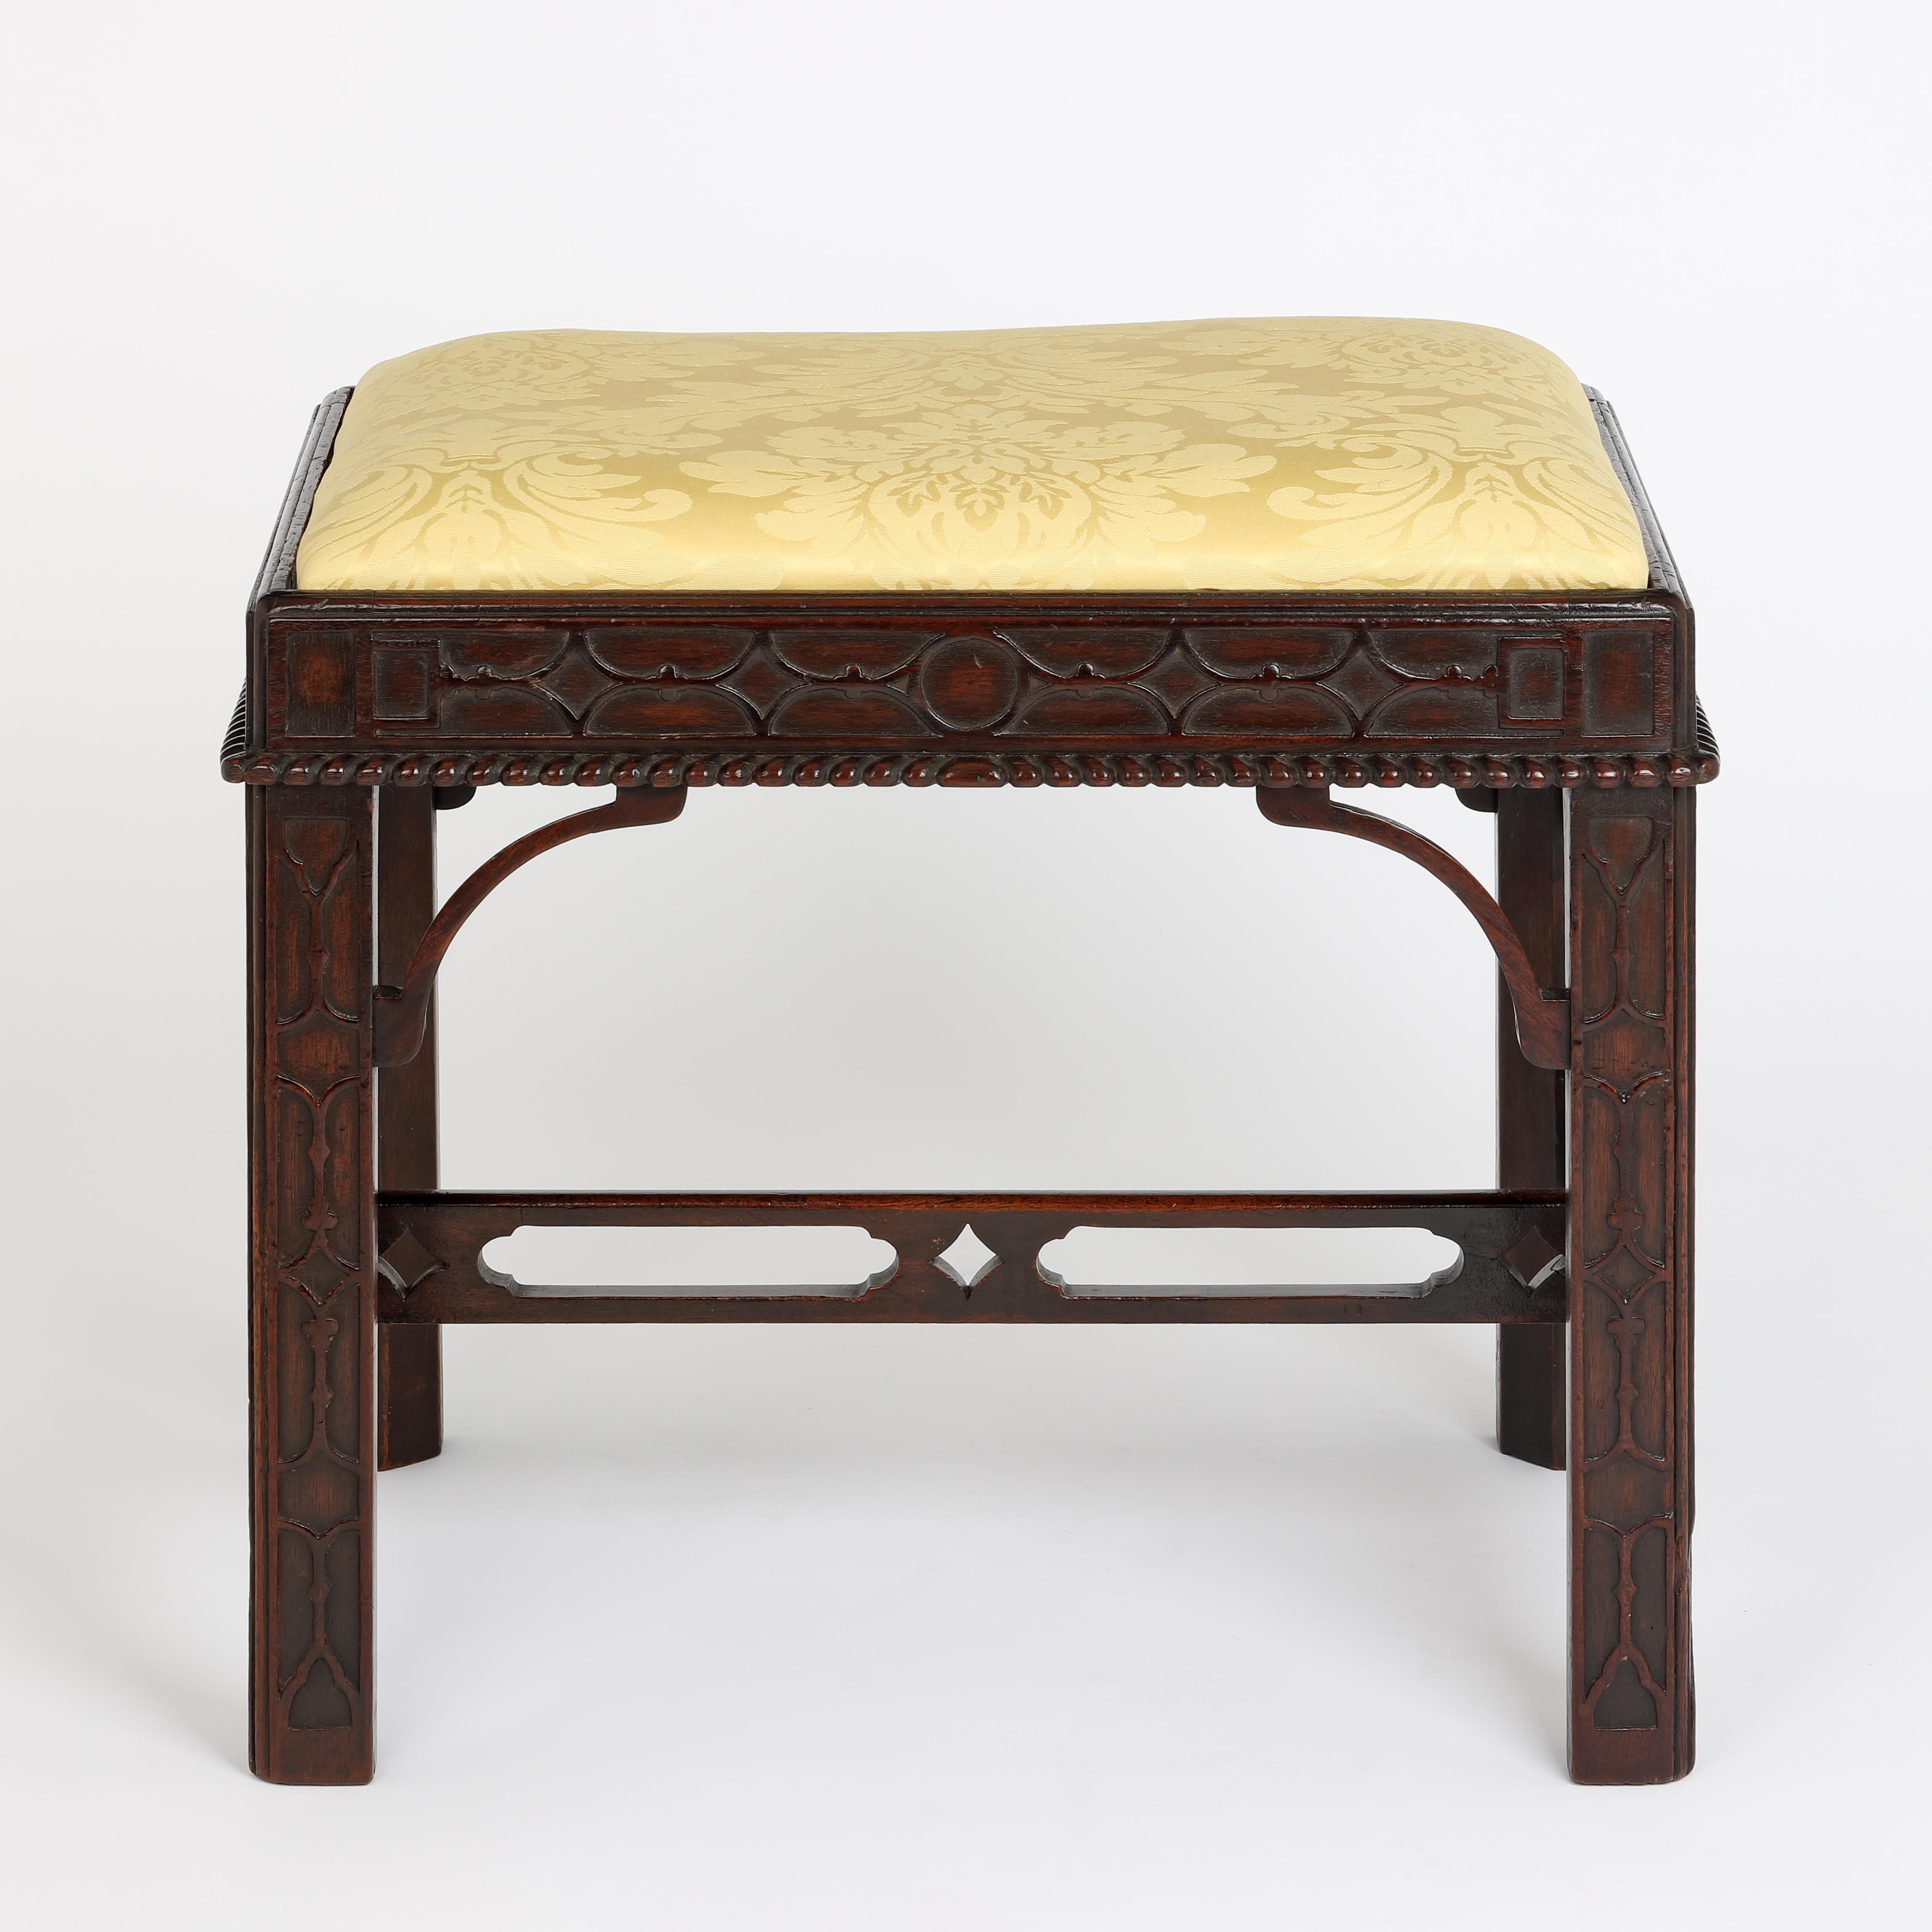 A fine quality 19th century mahogany rectangular stool the the Chinese Chippendale stlye with carved blind-fret carved decoration to the chamfered legs and frame, with gadrooned moulded edge and corner 'C'-scrolls.. The pierced 'H' stretchers below